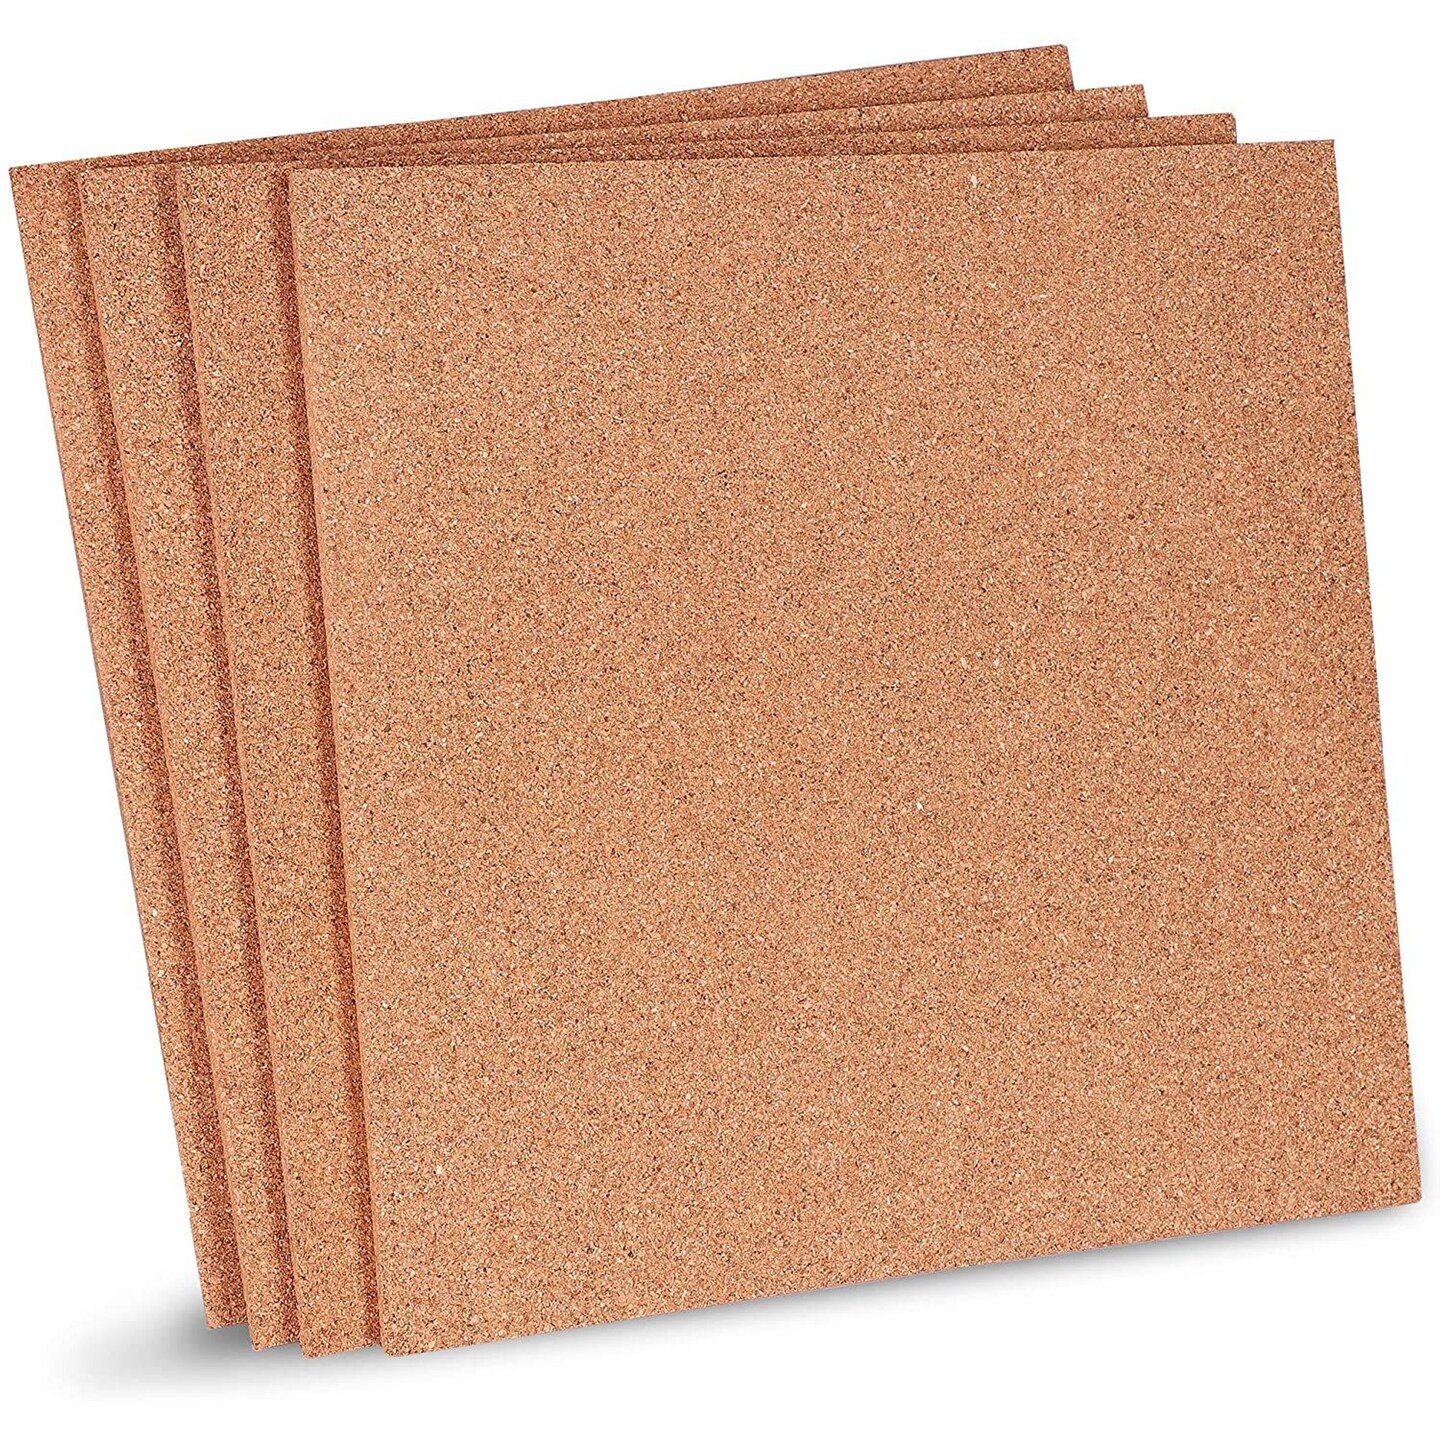 Cork Tiles-Use alone or place together to create shapes and patterns-Cuts  easily